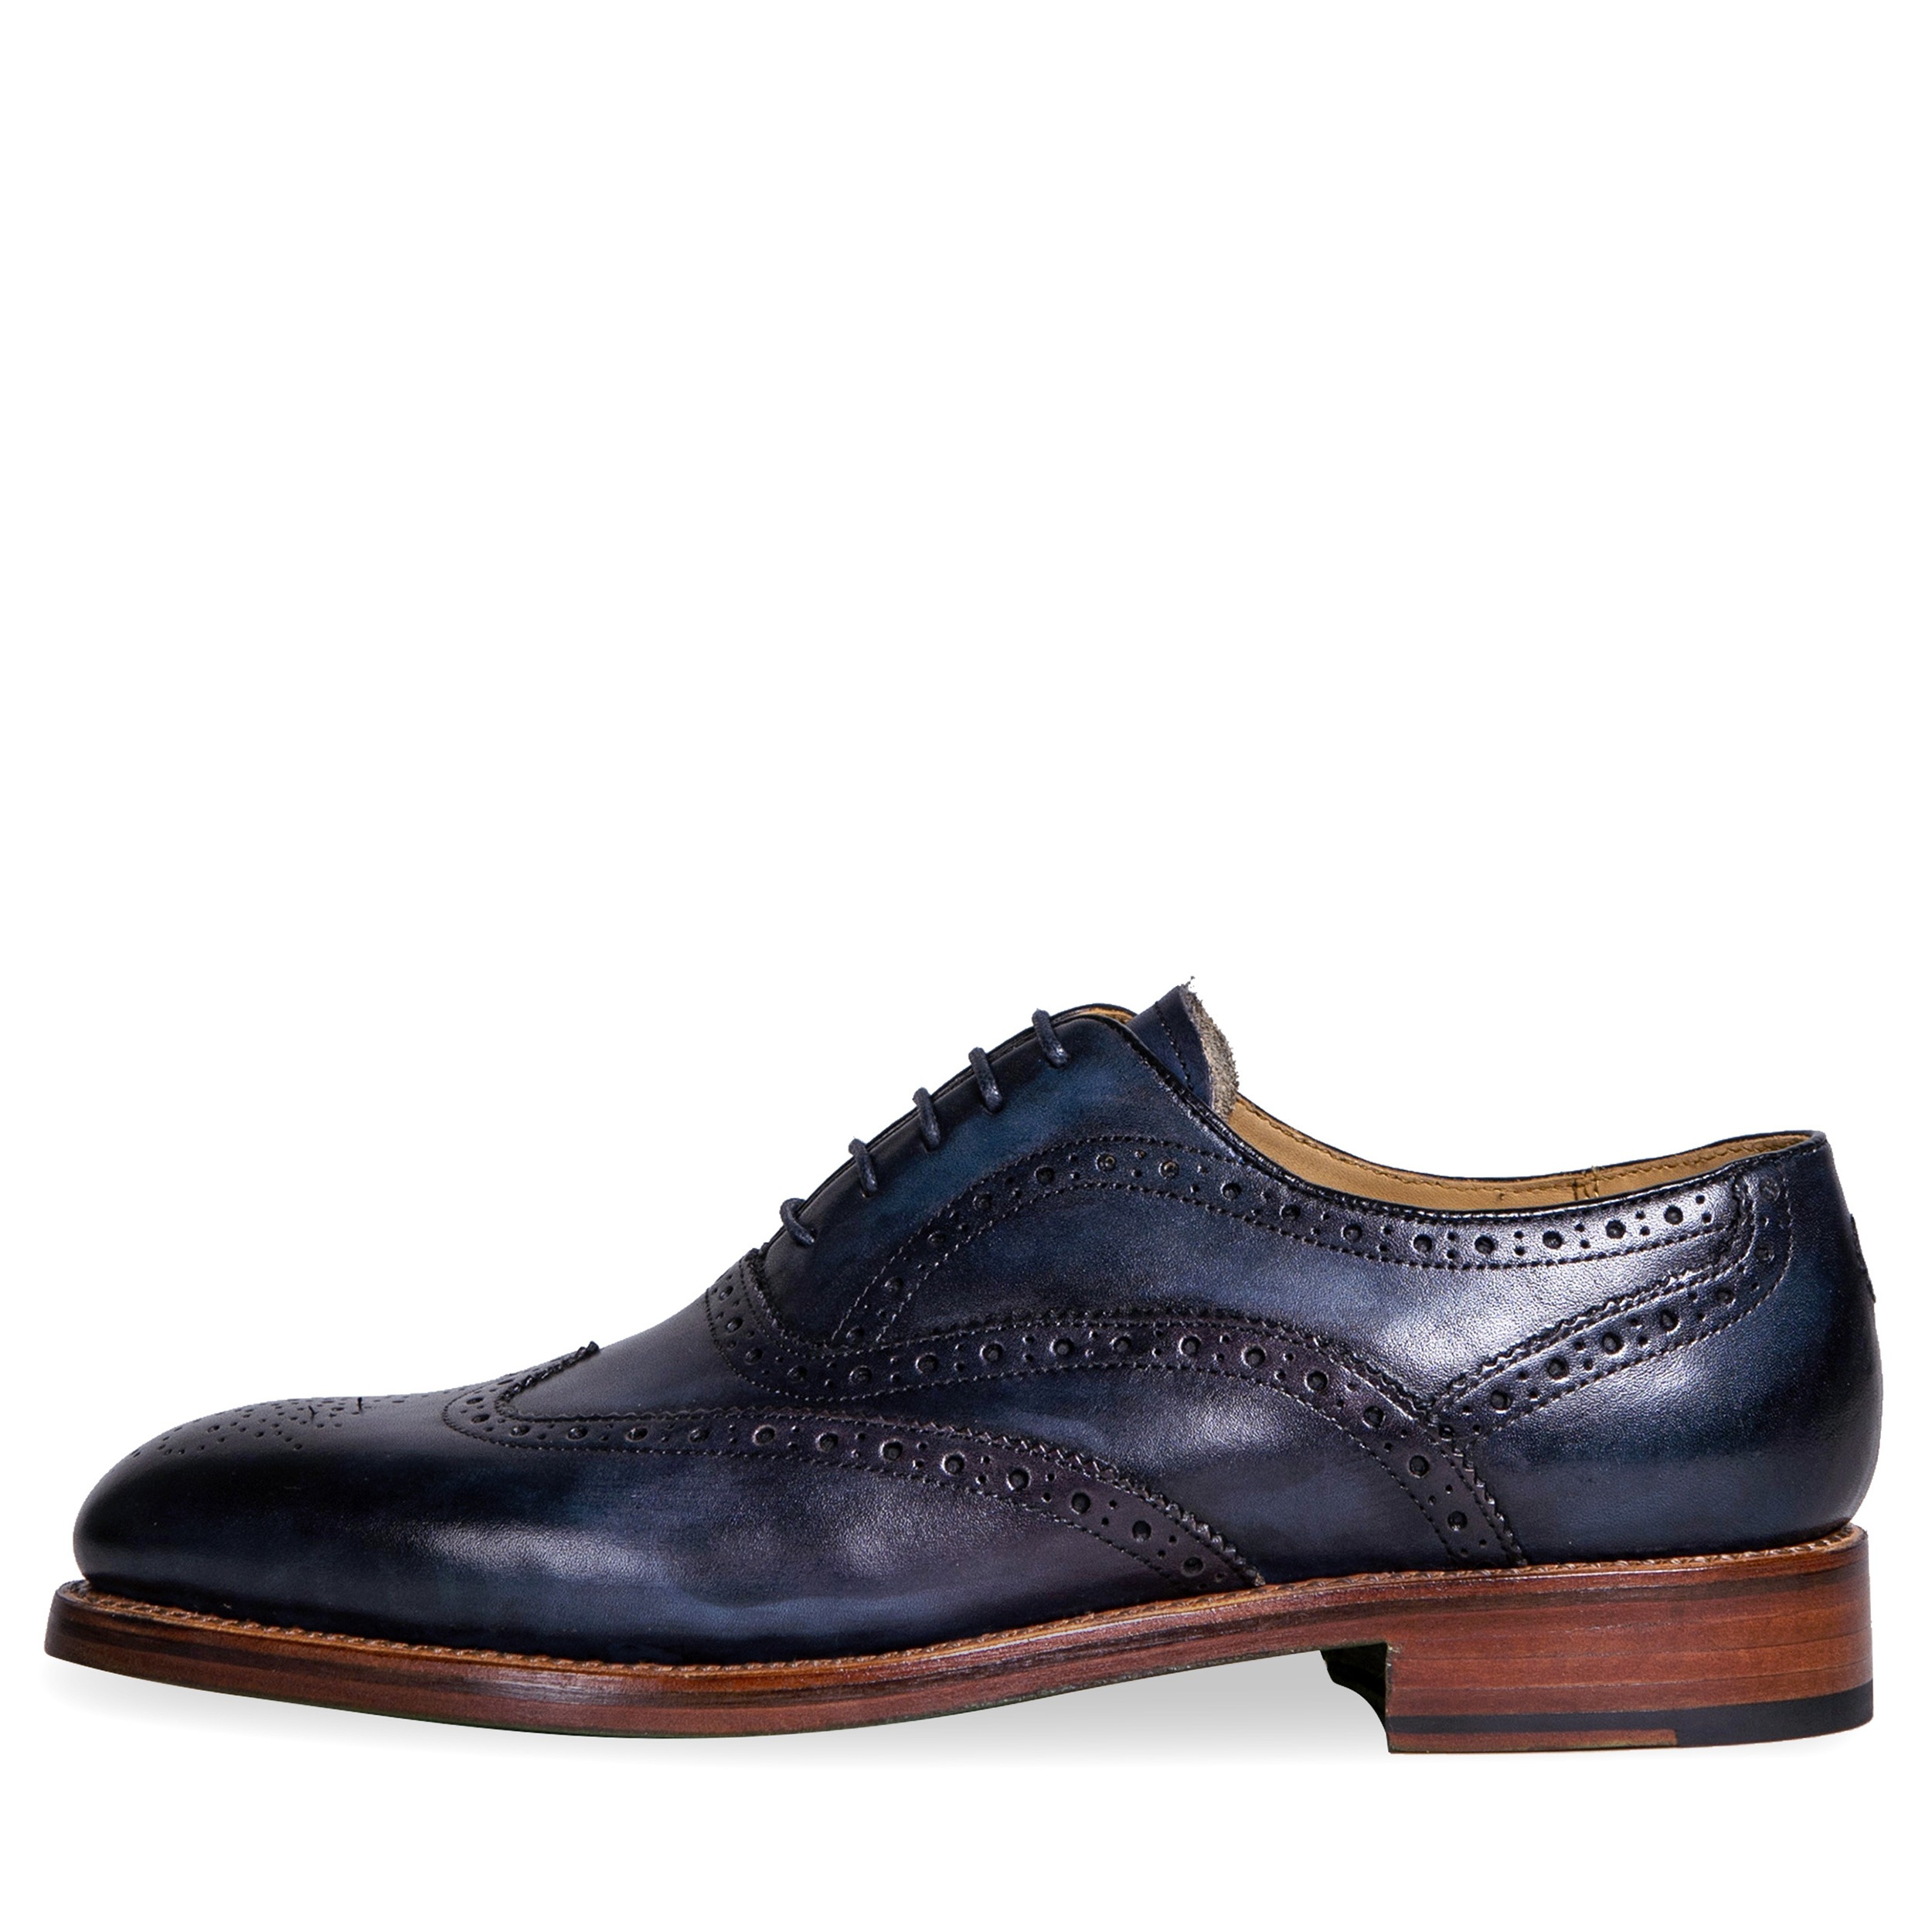 Oliver Sweeney ’Stoneygate’ Oxford Brogue Blue